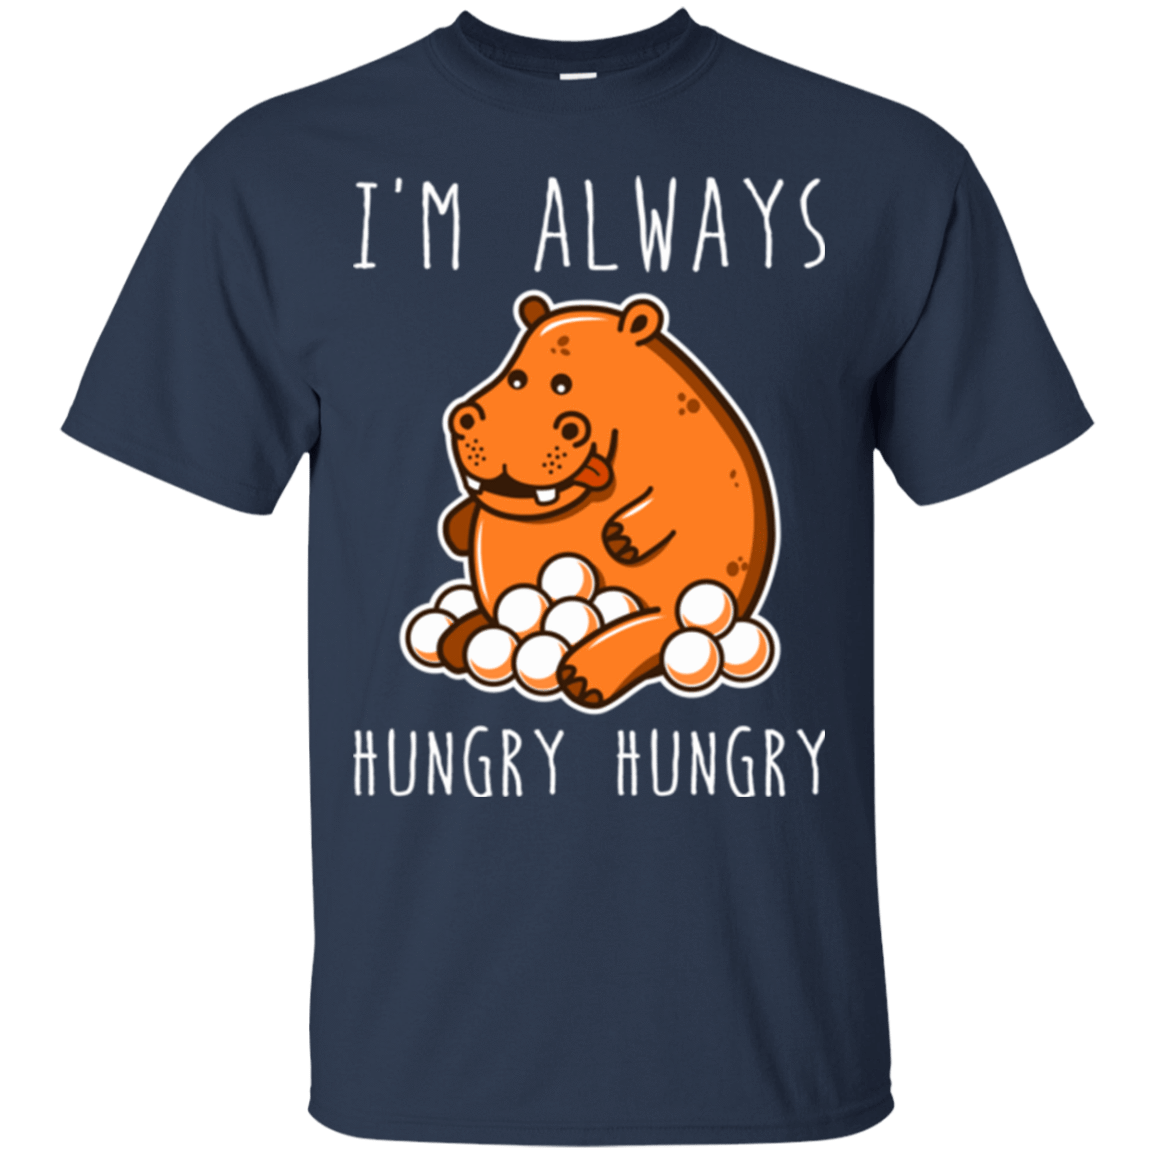 T-Shirts Navy / Small Hungry Hungry T-Shirt